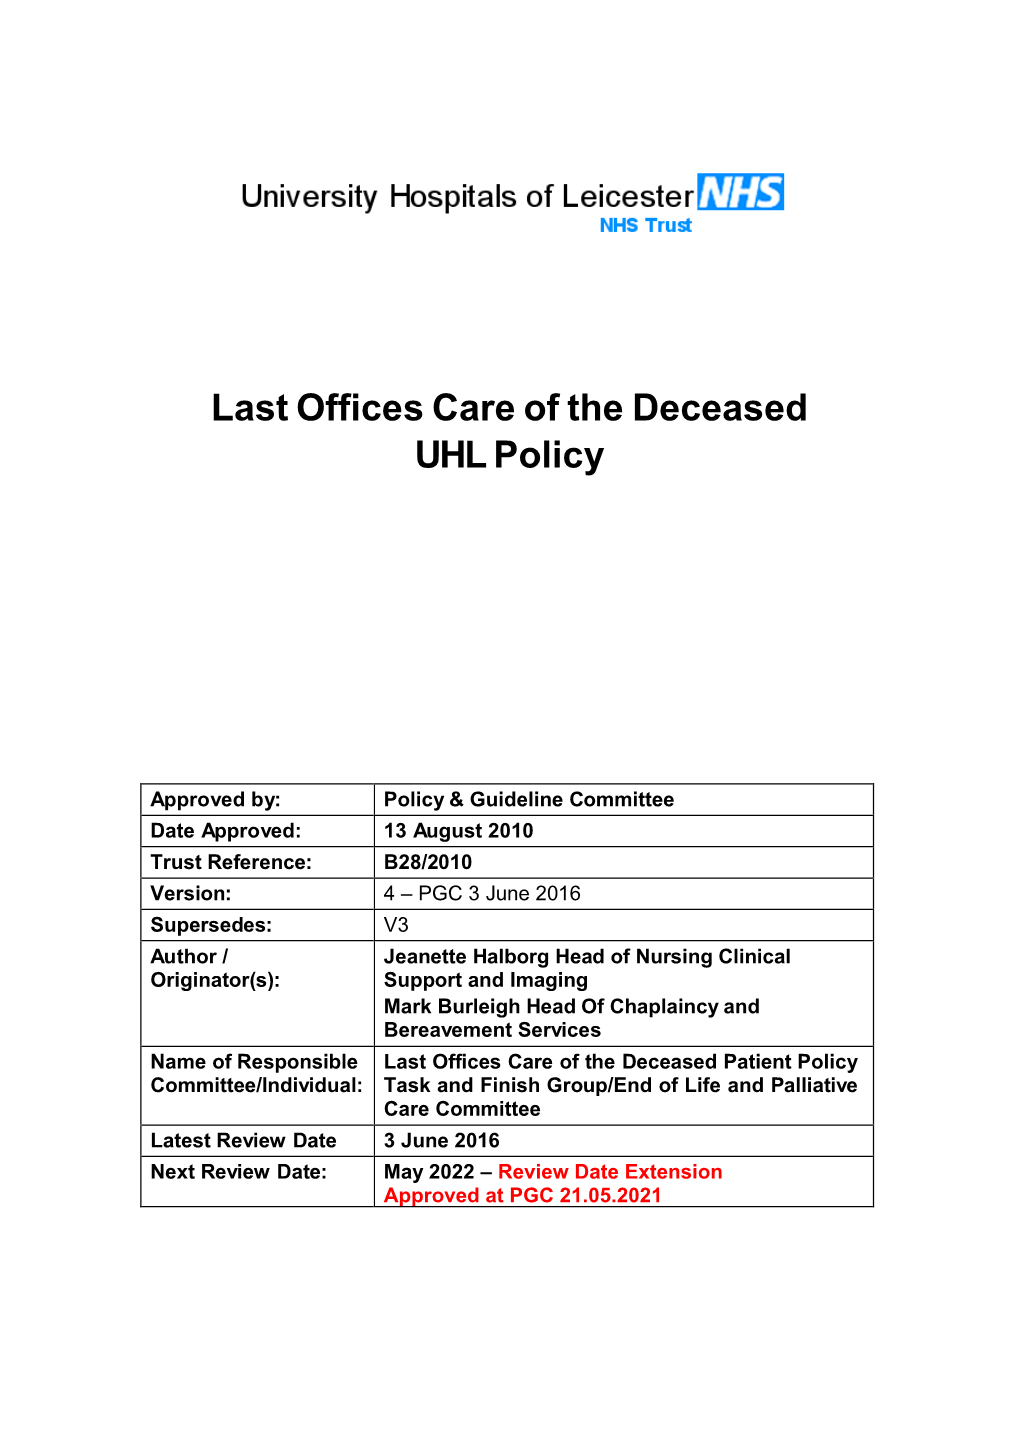 Last Offices Care of the Deceased UHL Policy